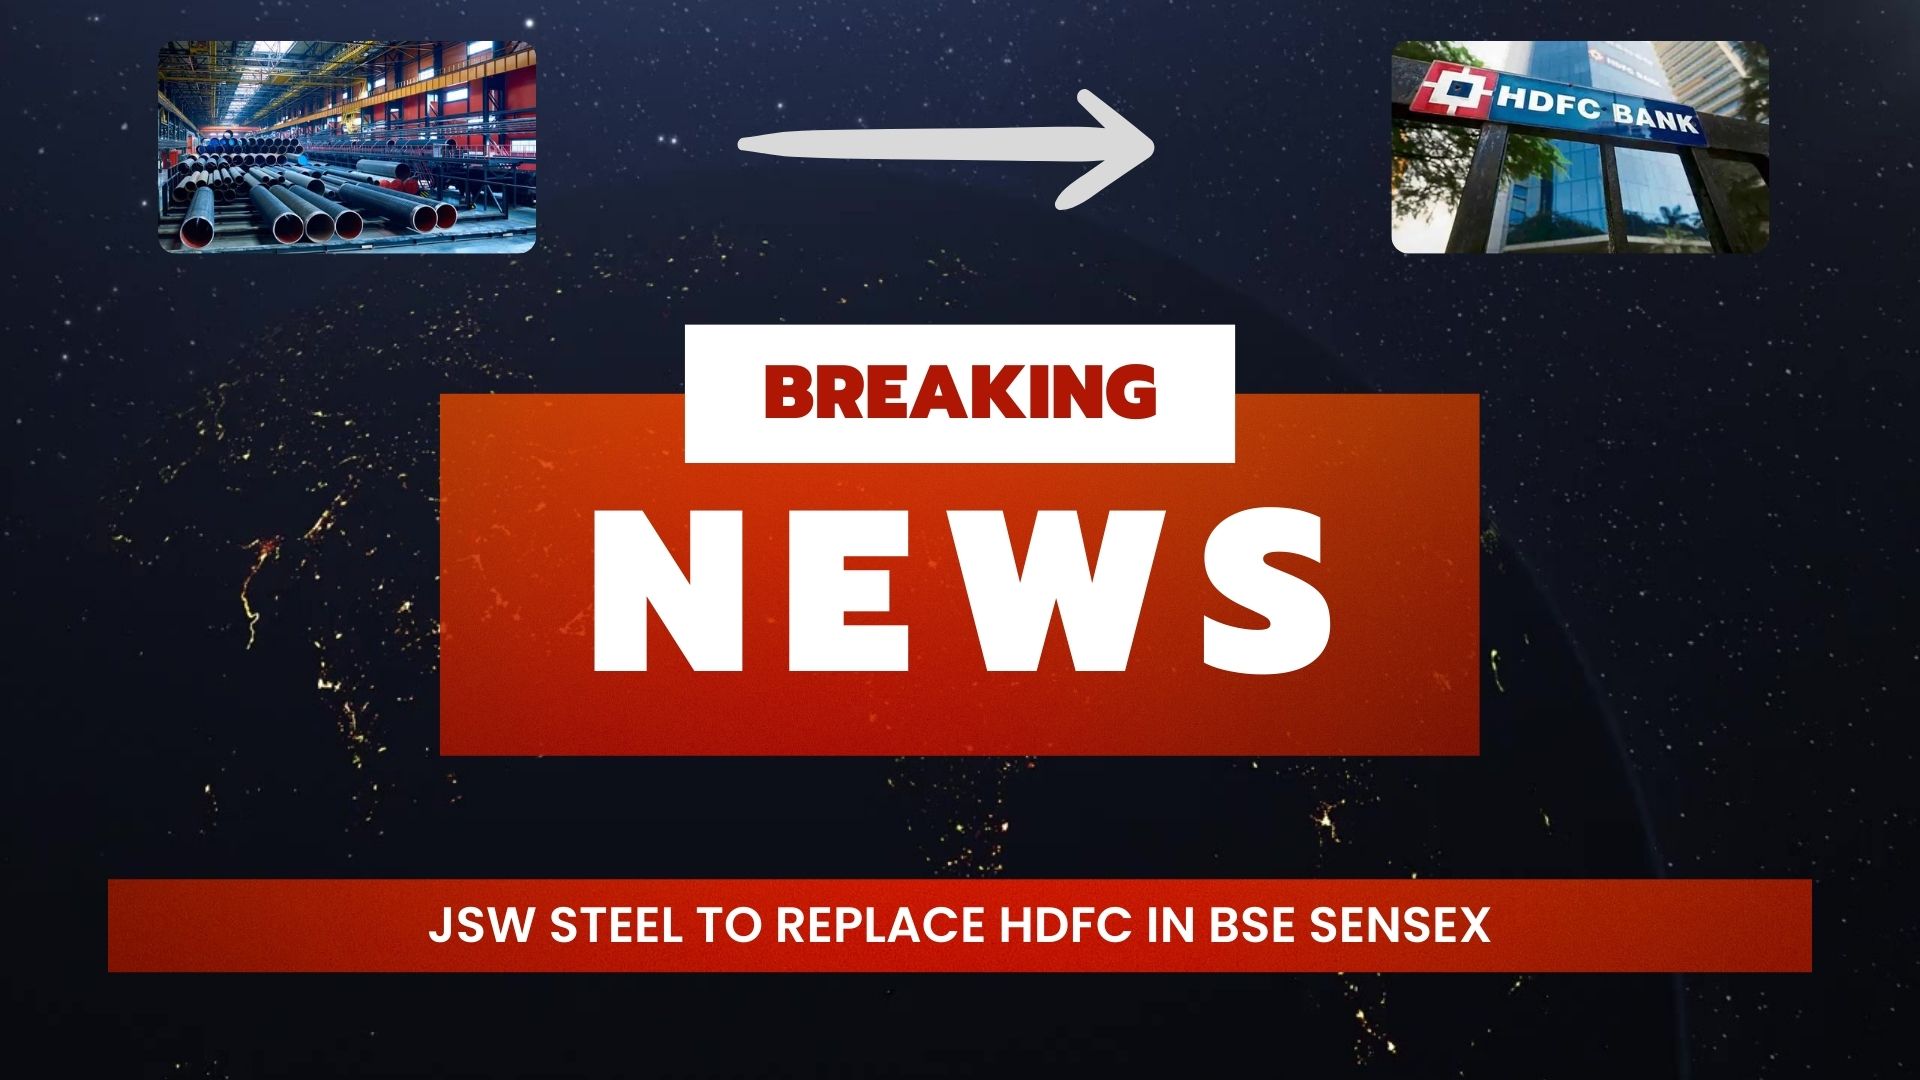 JSW TO REPLACE HDFC